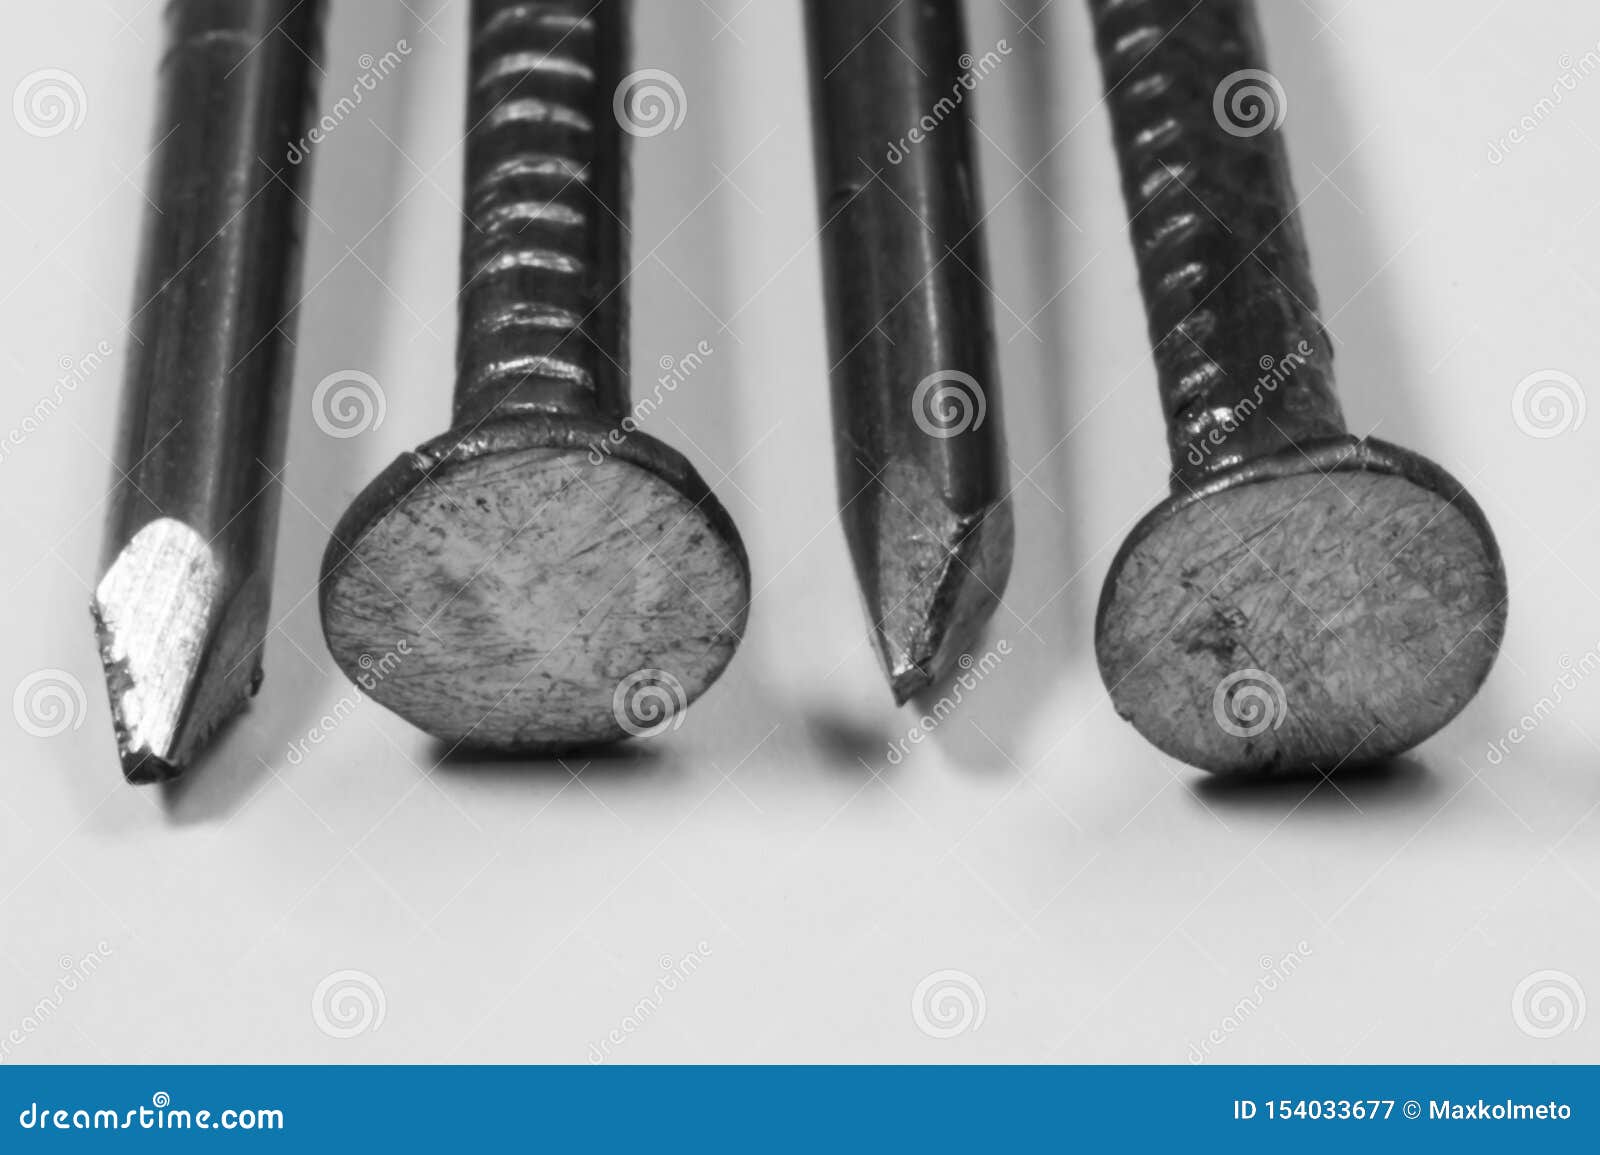 Metal Nails Isolated on White Background. Working Tools Stock Image ...